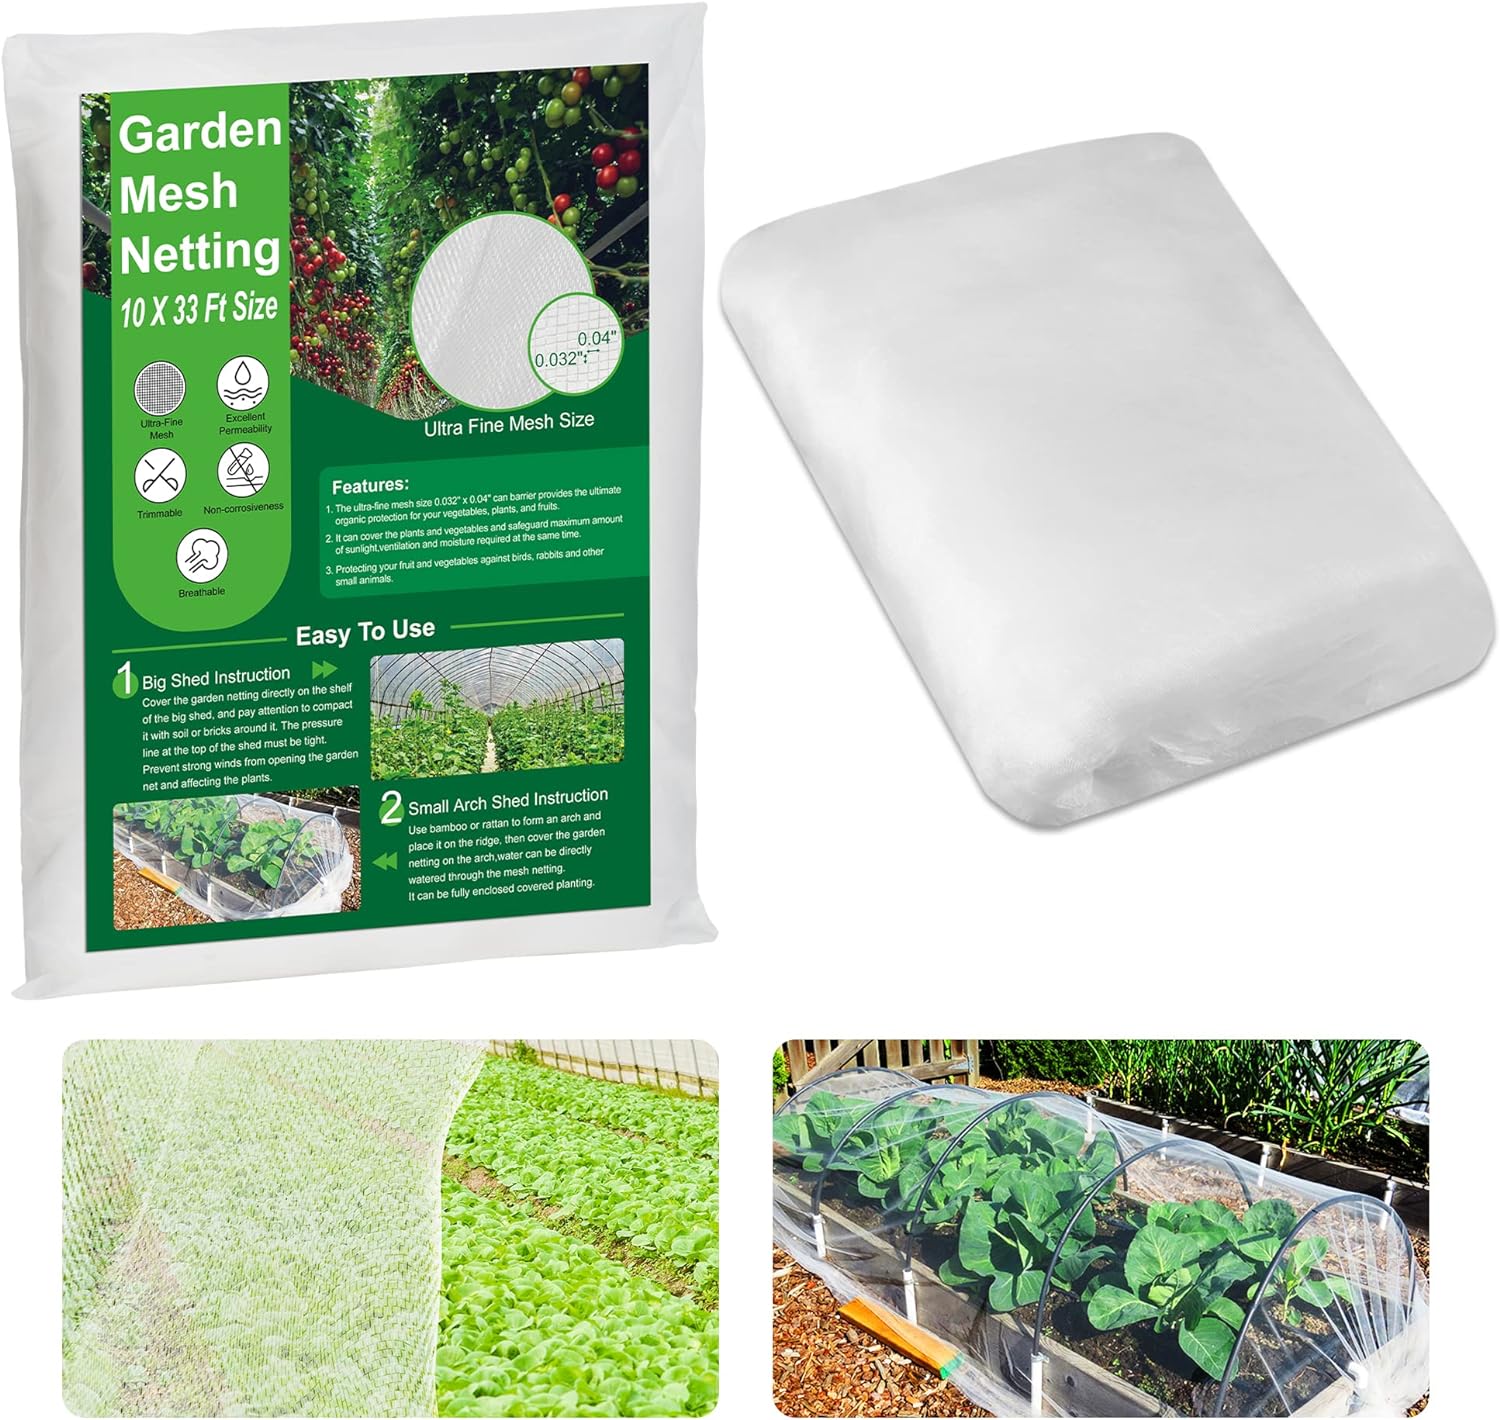 KY-YPFW 10x33 Ft Garden Netting Plant Covers - 0.032 x 0.04 Ultra Fine Mesh Protect Vegetables Fruits Flowers Plants Crops Greenhouse Row Cover Protection Screen Barrier Net for Birds Animals, White